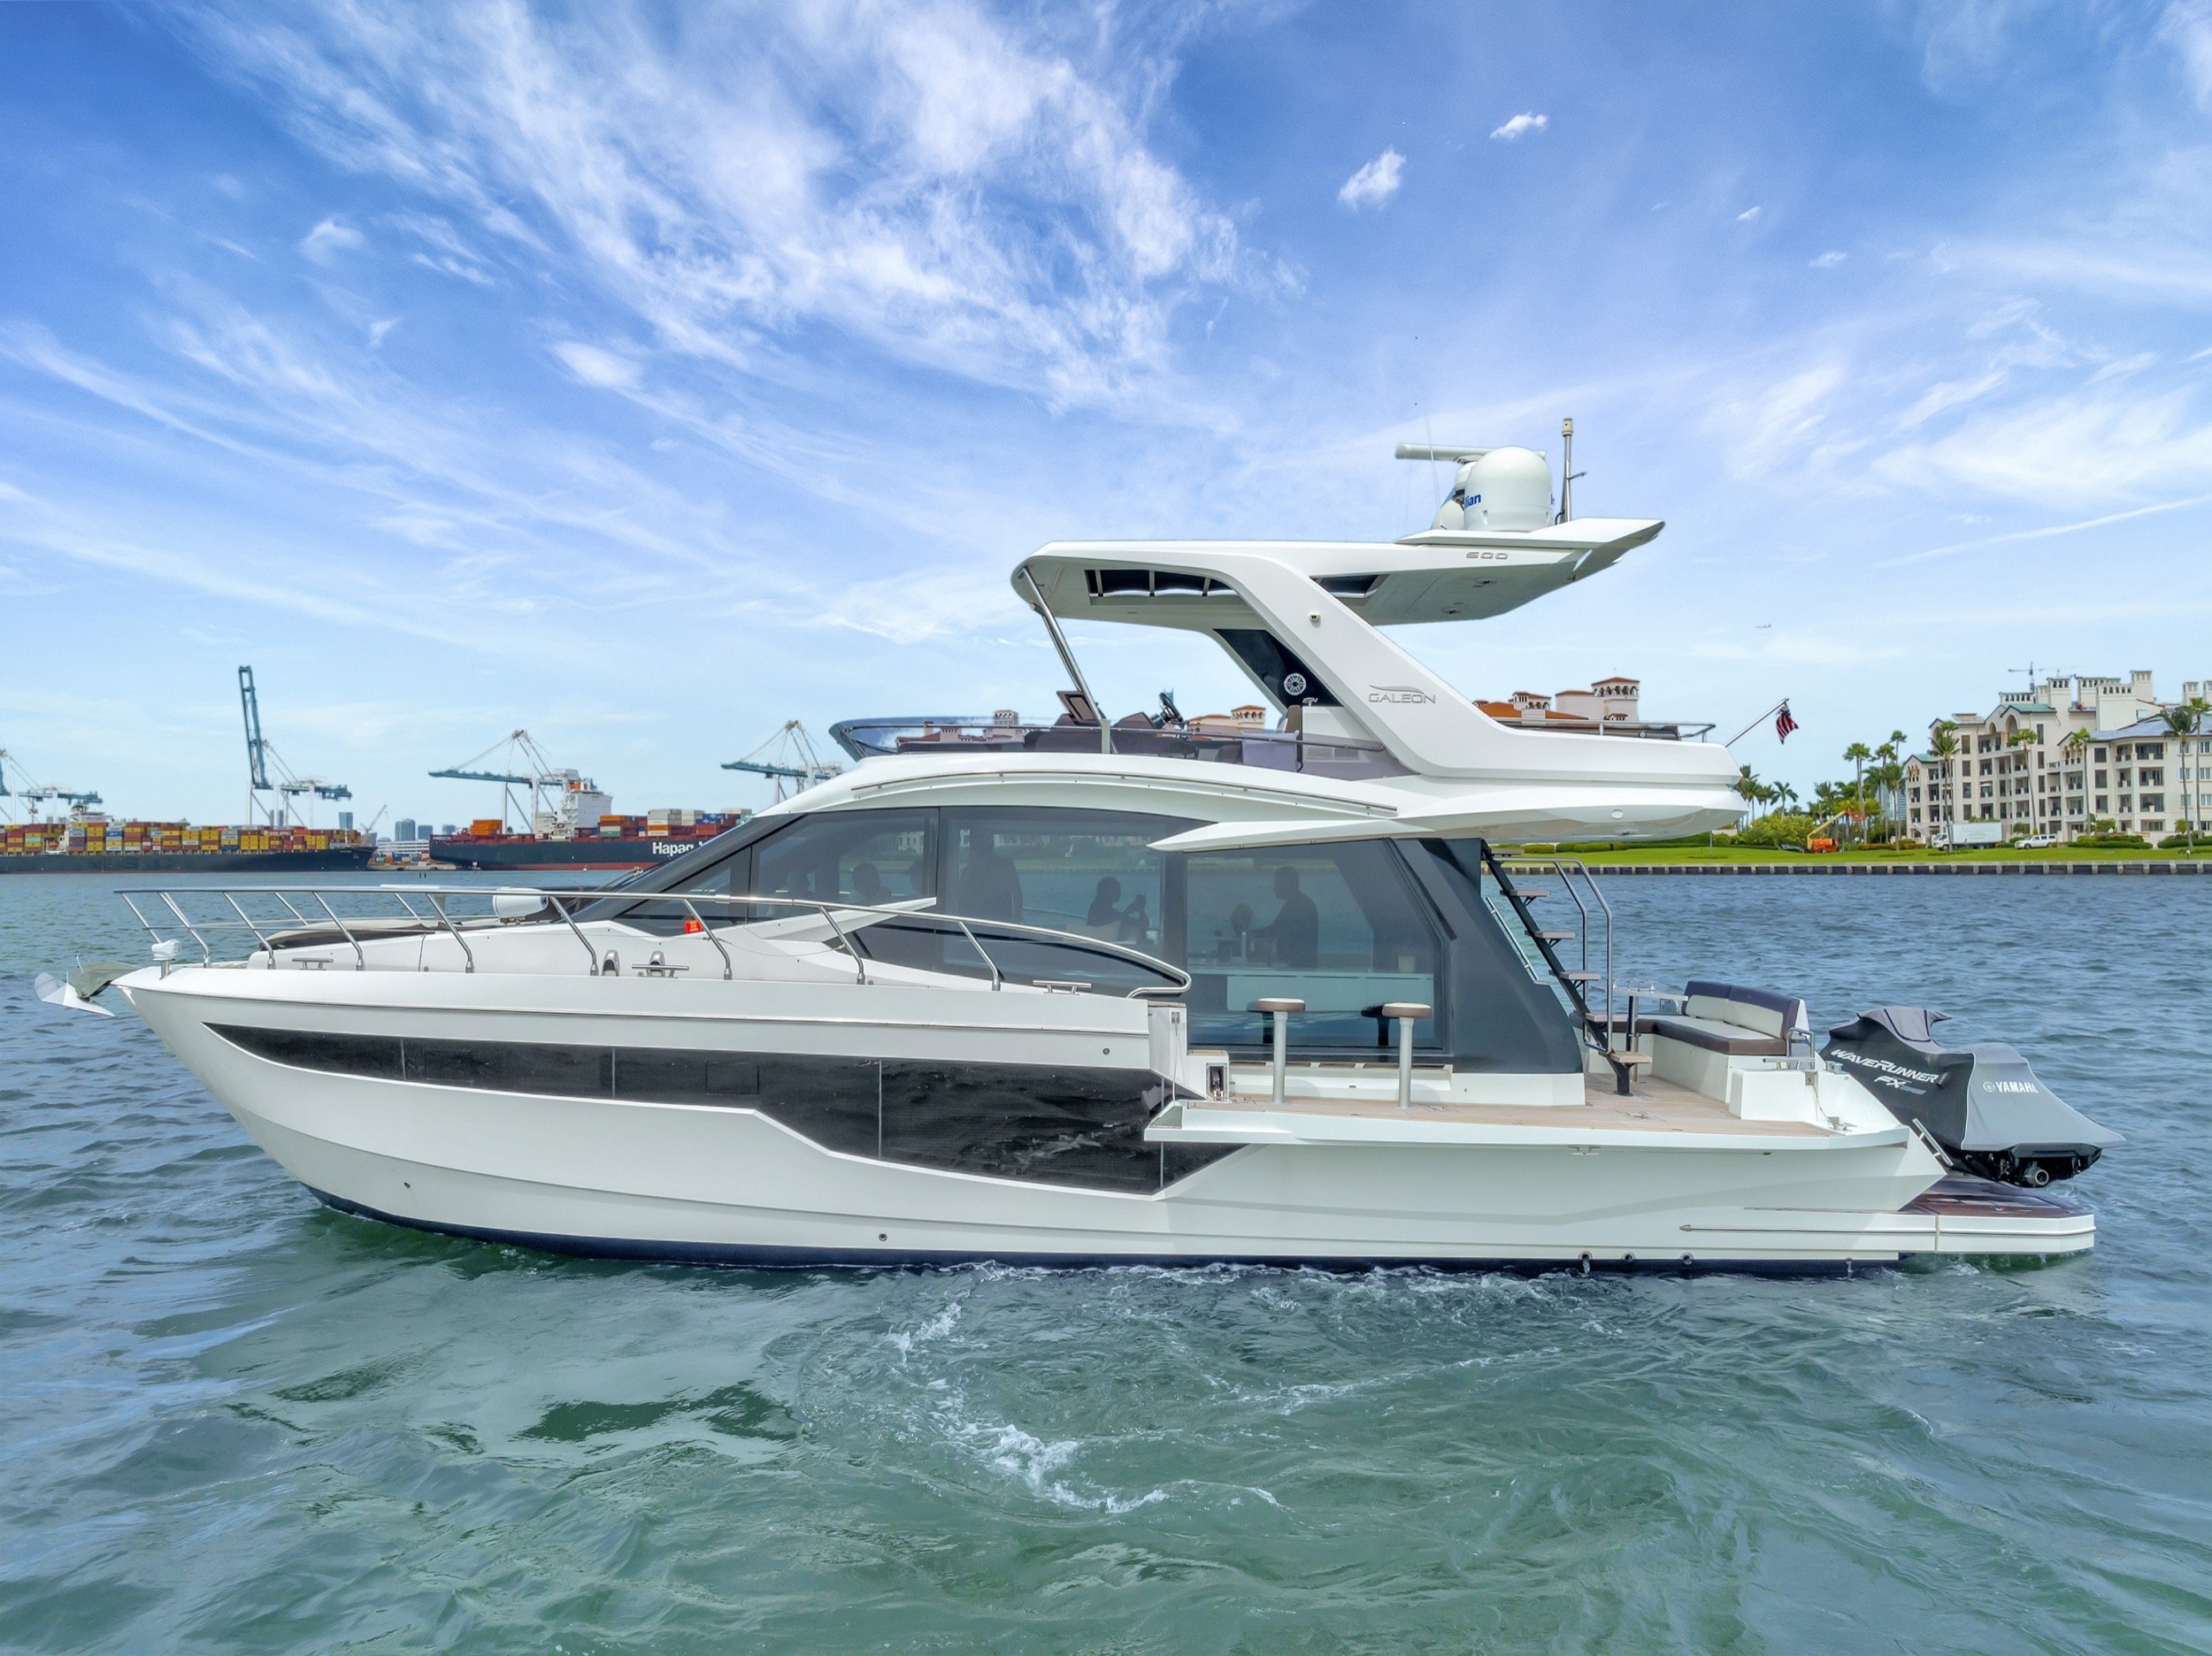 52 ft Galeon | From $2800 | 12 guest max